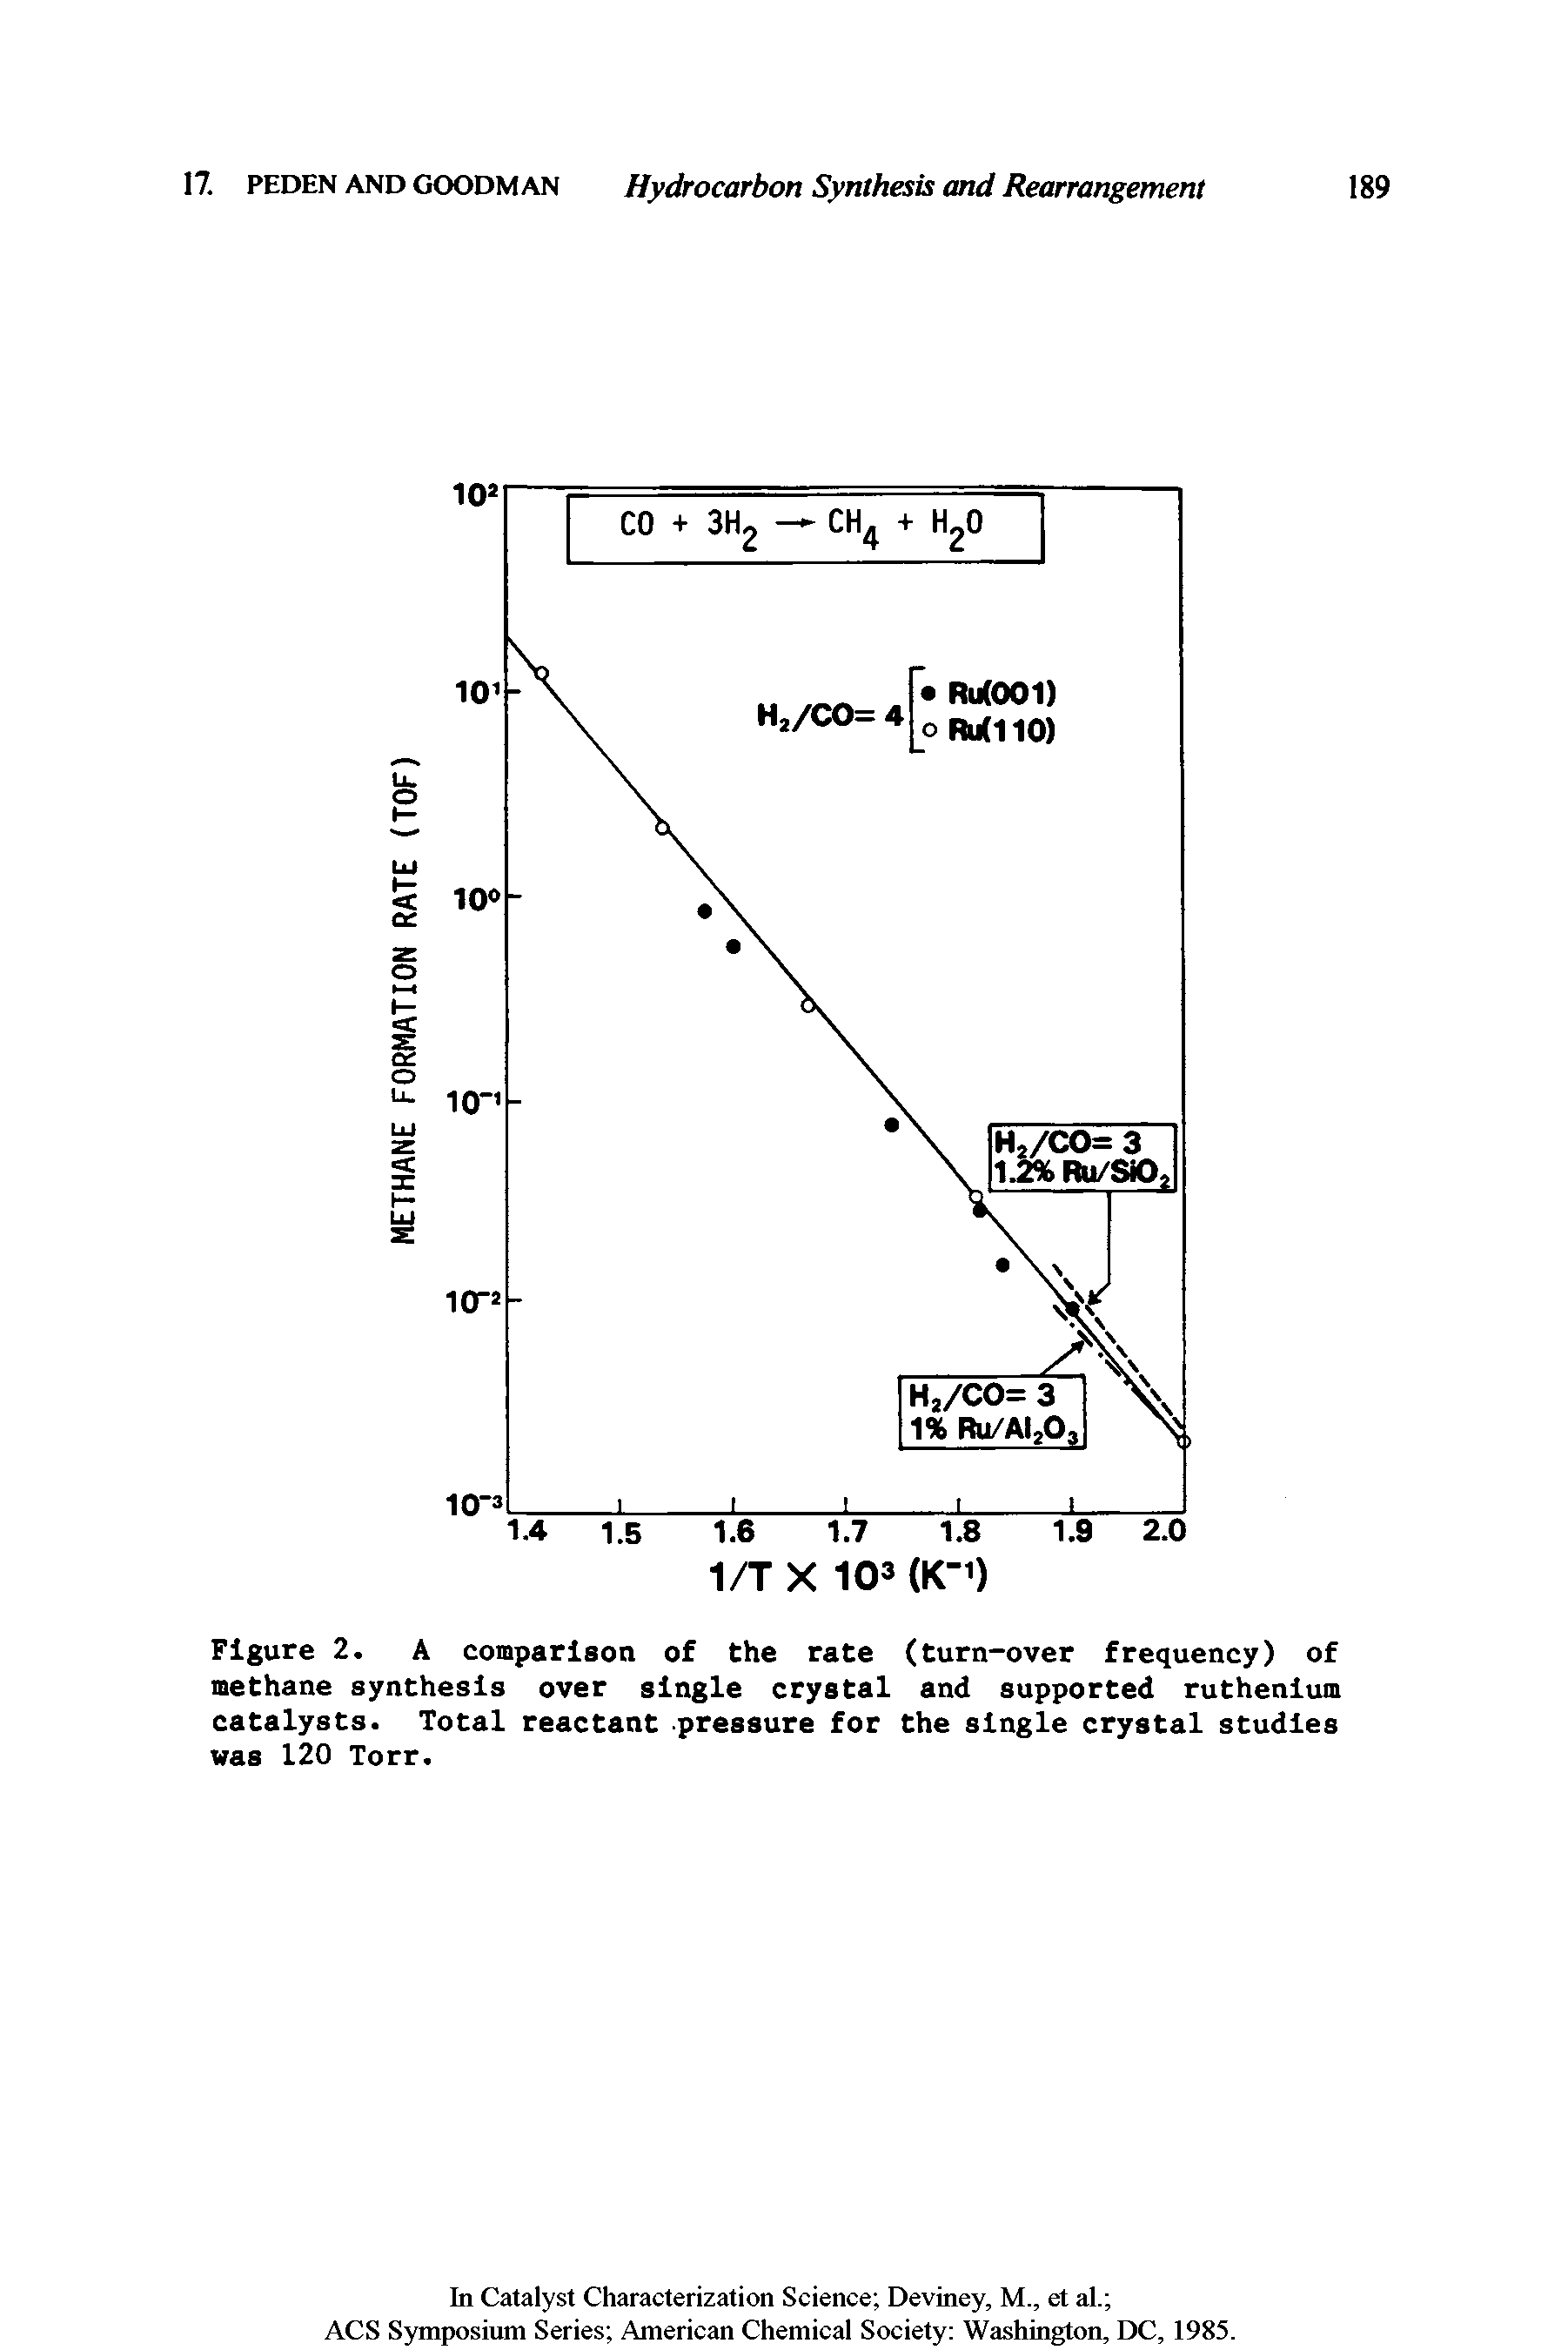 Figure 2. A comparison of the rate (turn-over frequency) of methane synthesis over single crystal and supported ruthenium catalysts. Total reactant pressure for the single crystal studies was 120 Torr.